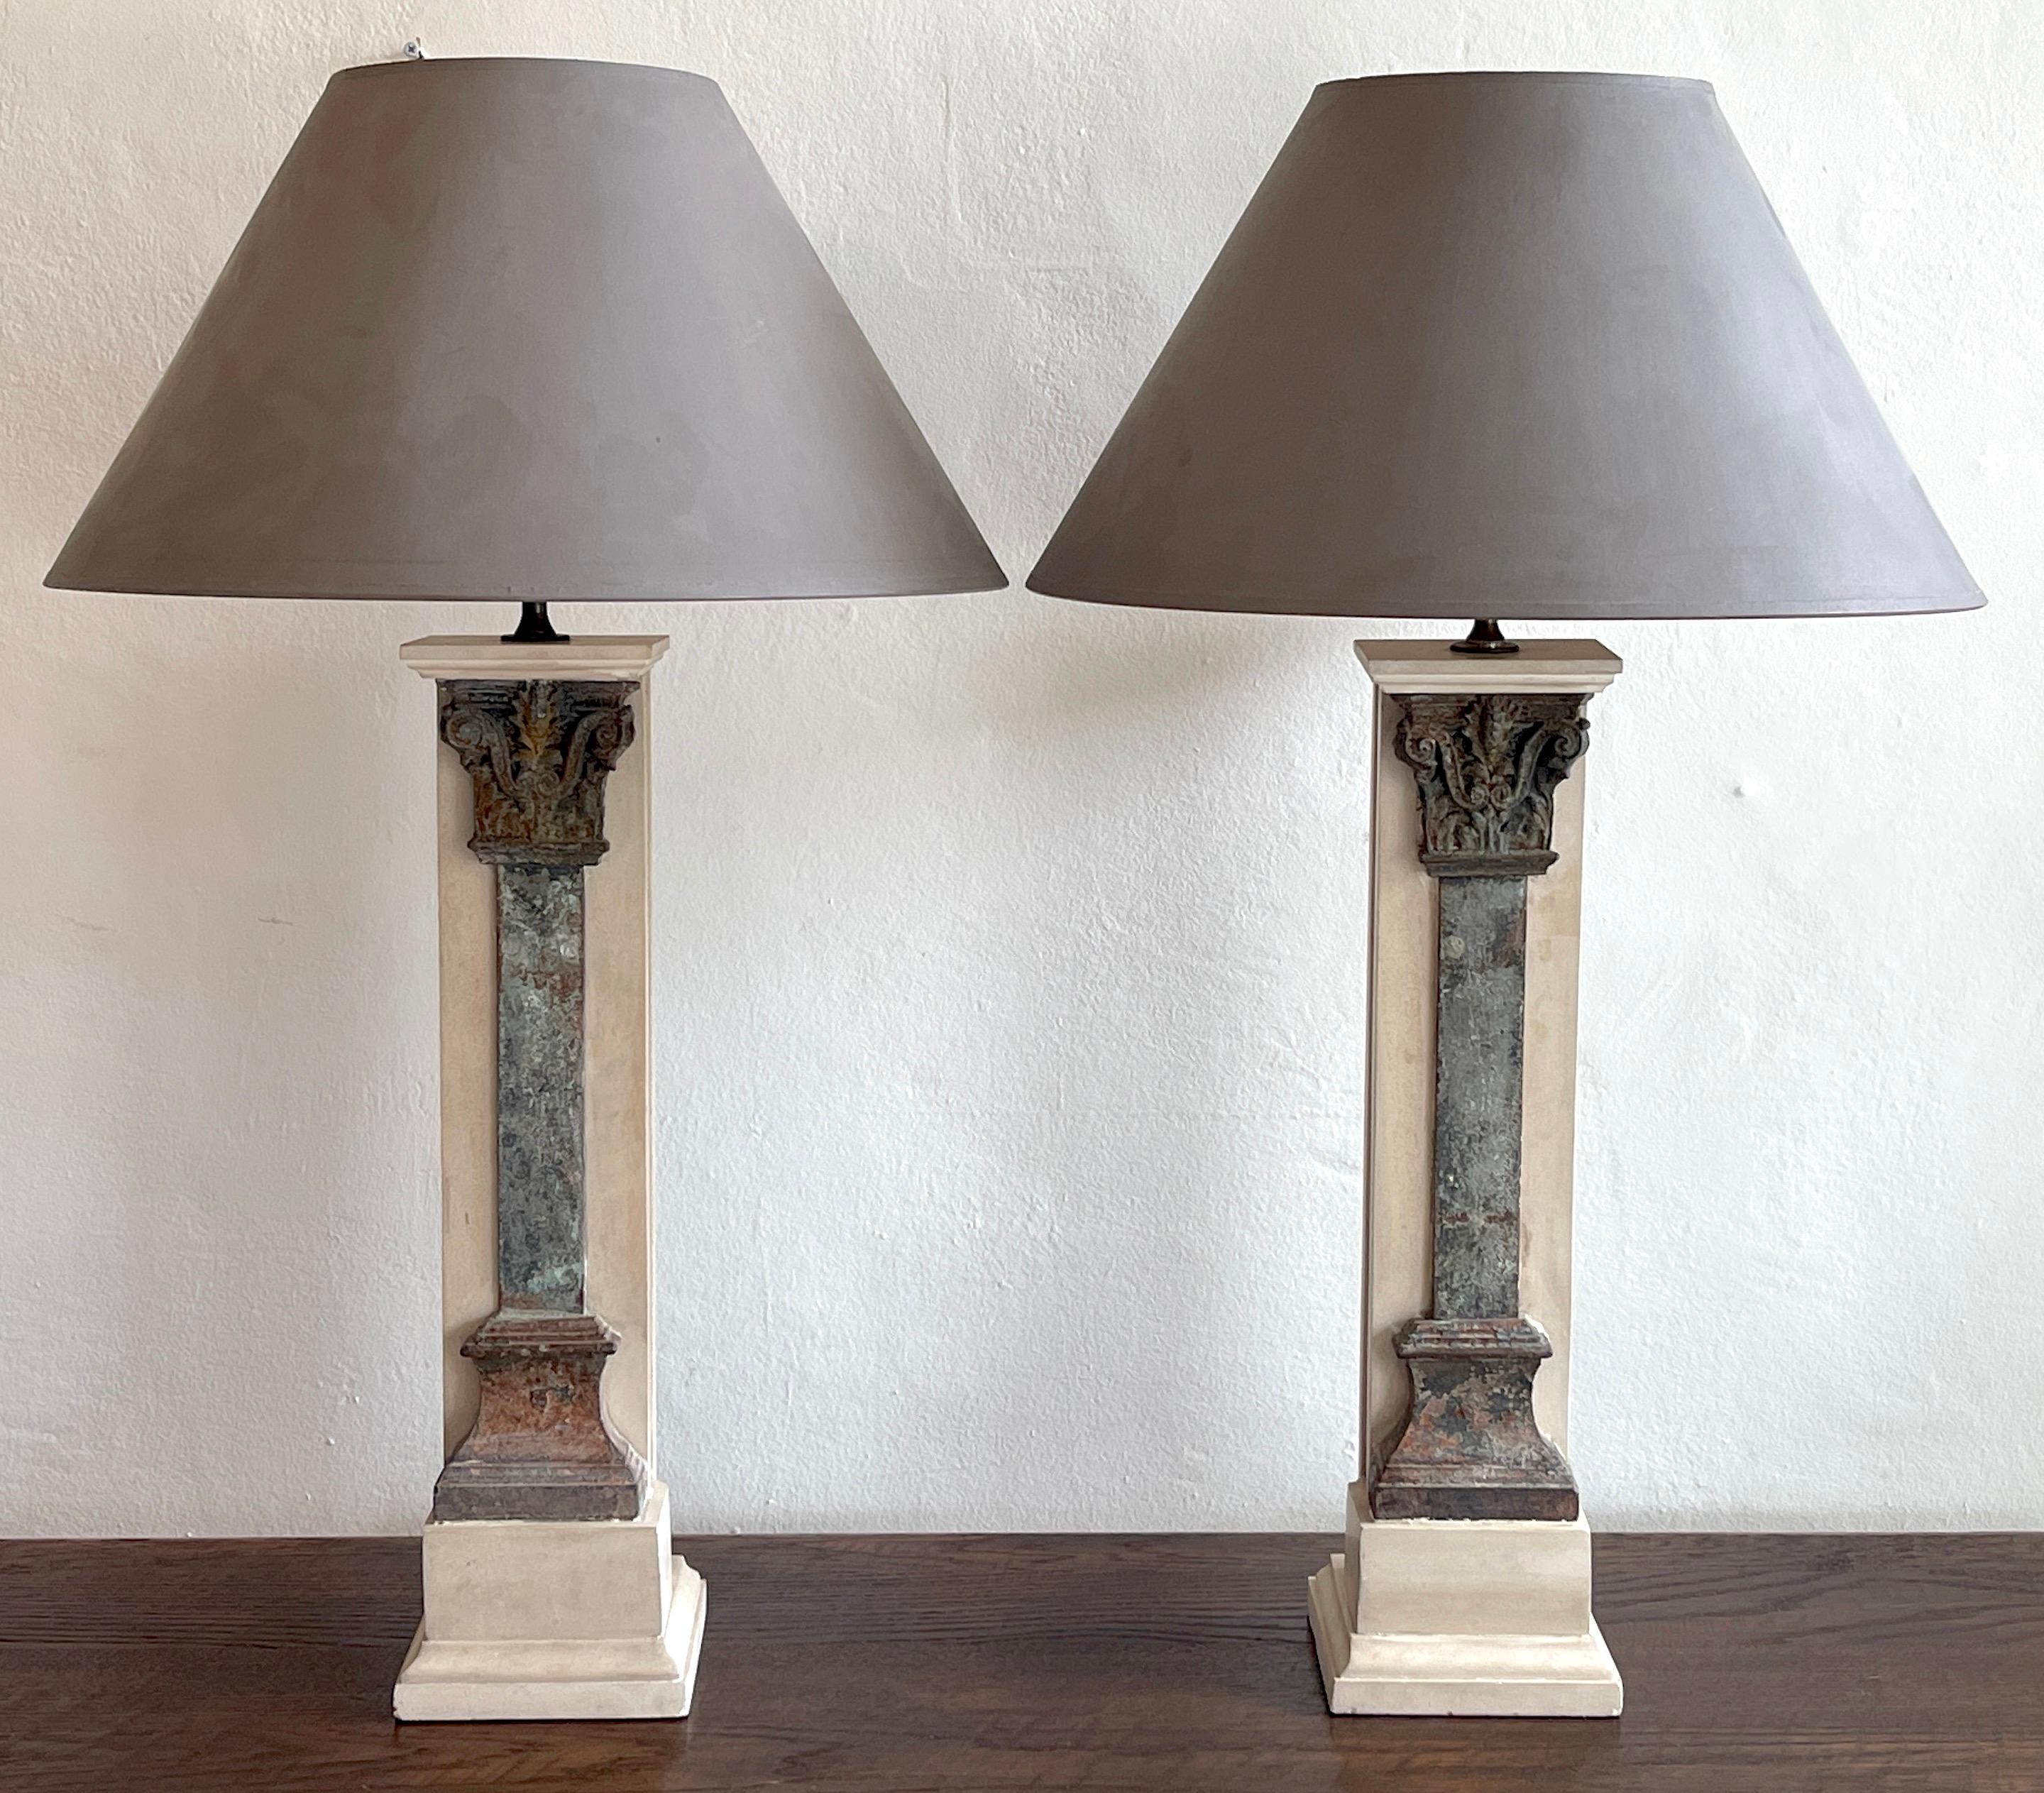 Pair of Italian grand tour style marble & column lamps
Each one a substantial marble column mounted with a inset verdigris Corinthian Column.

Each lamp measures 35